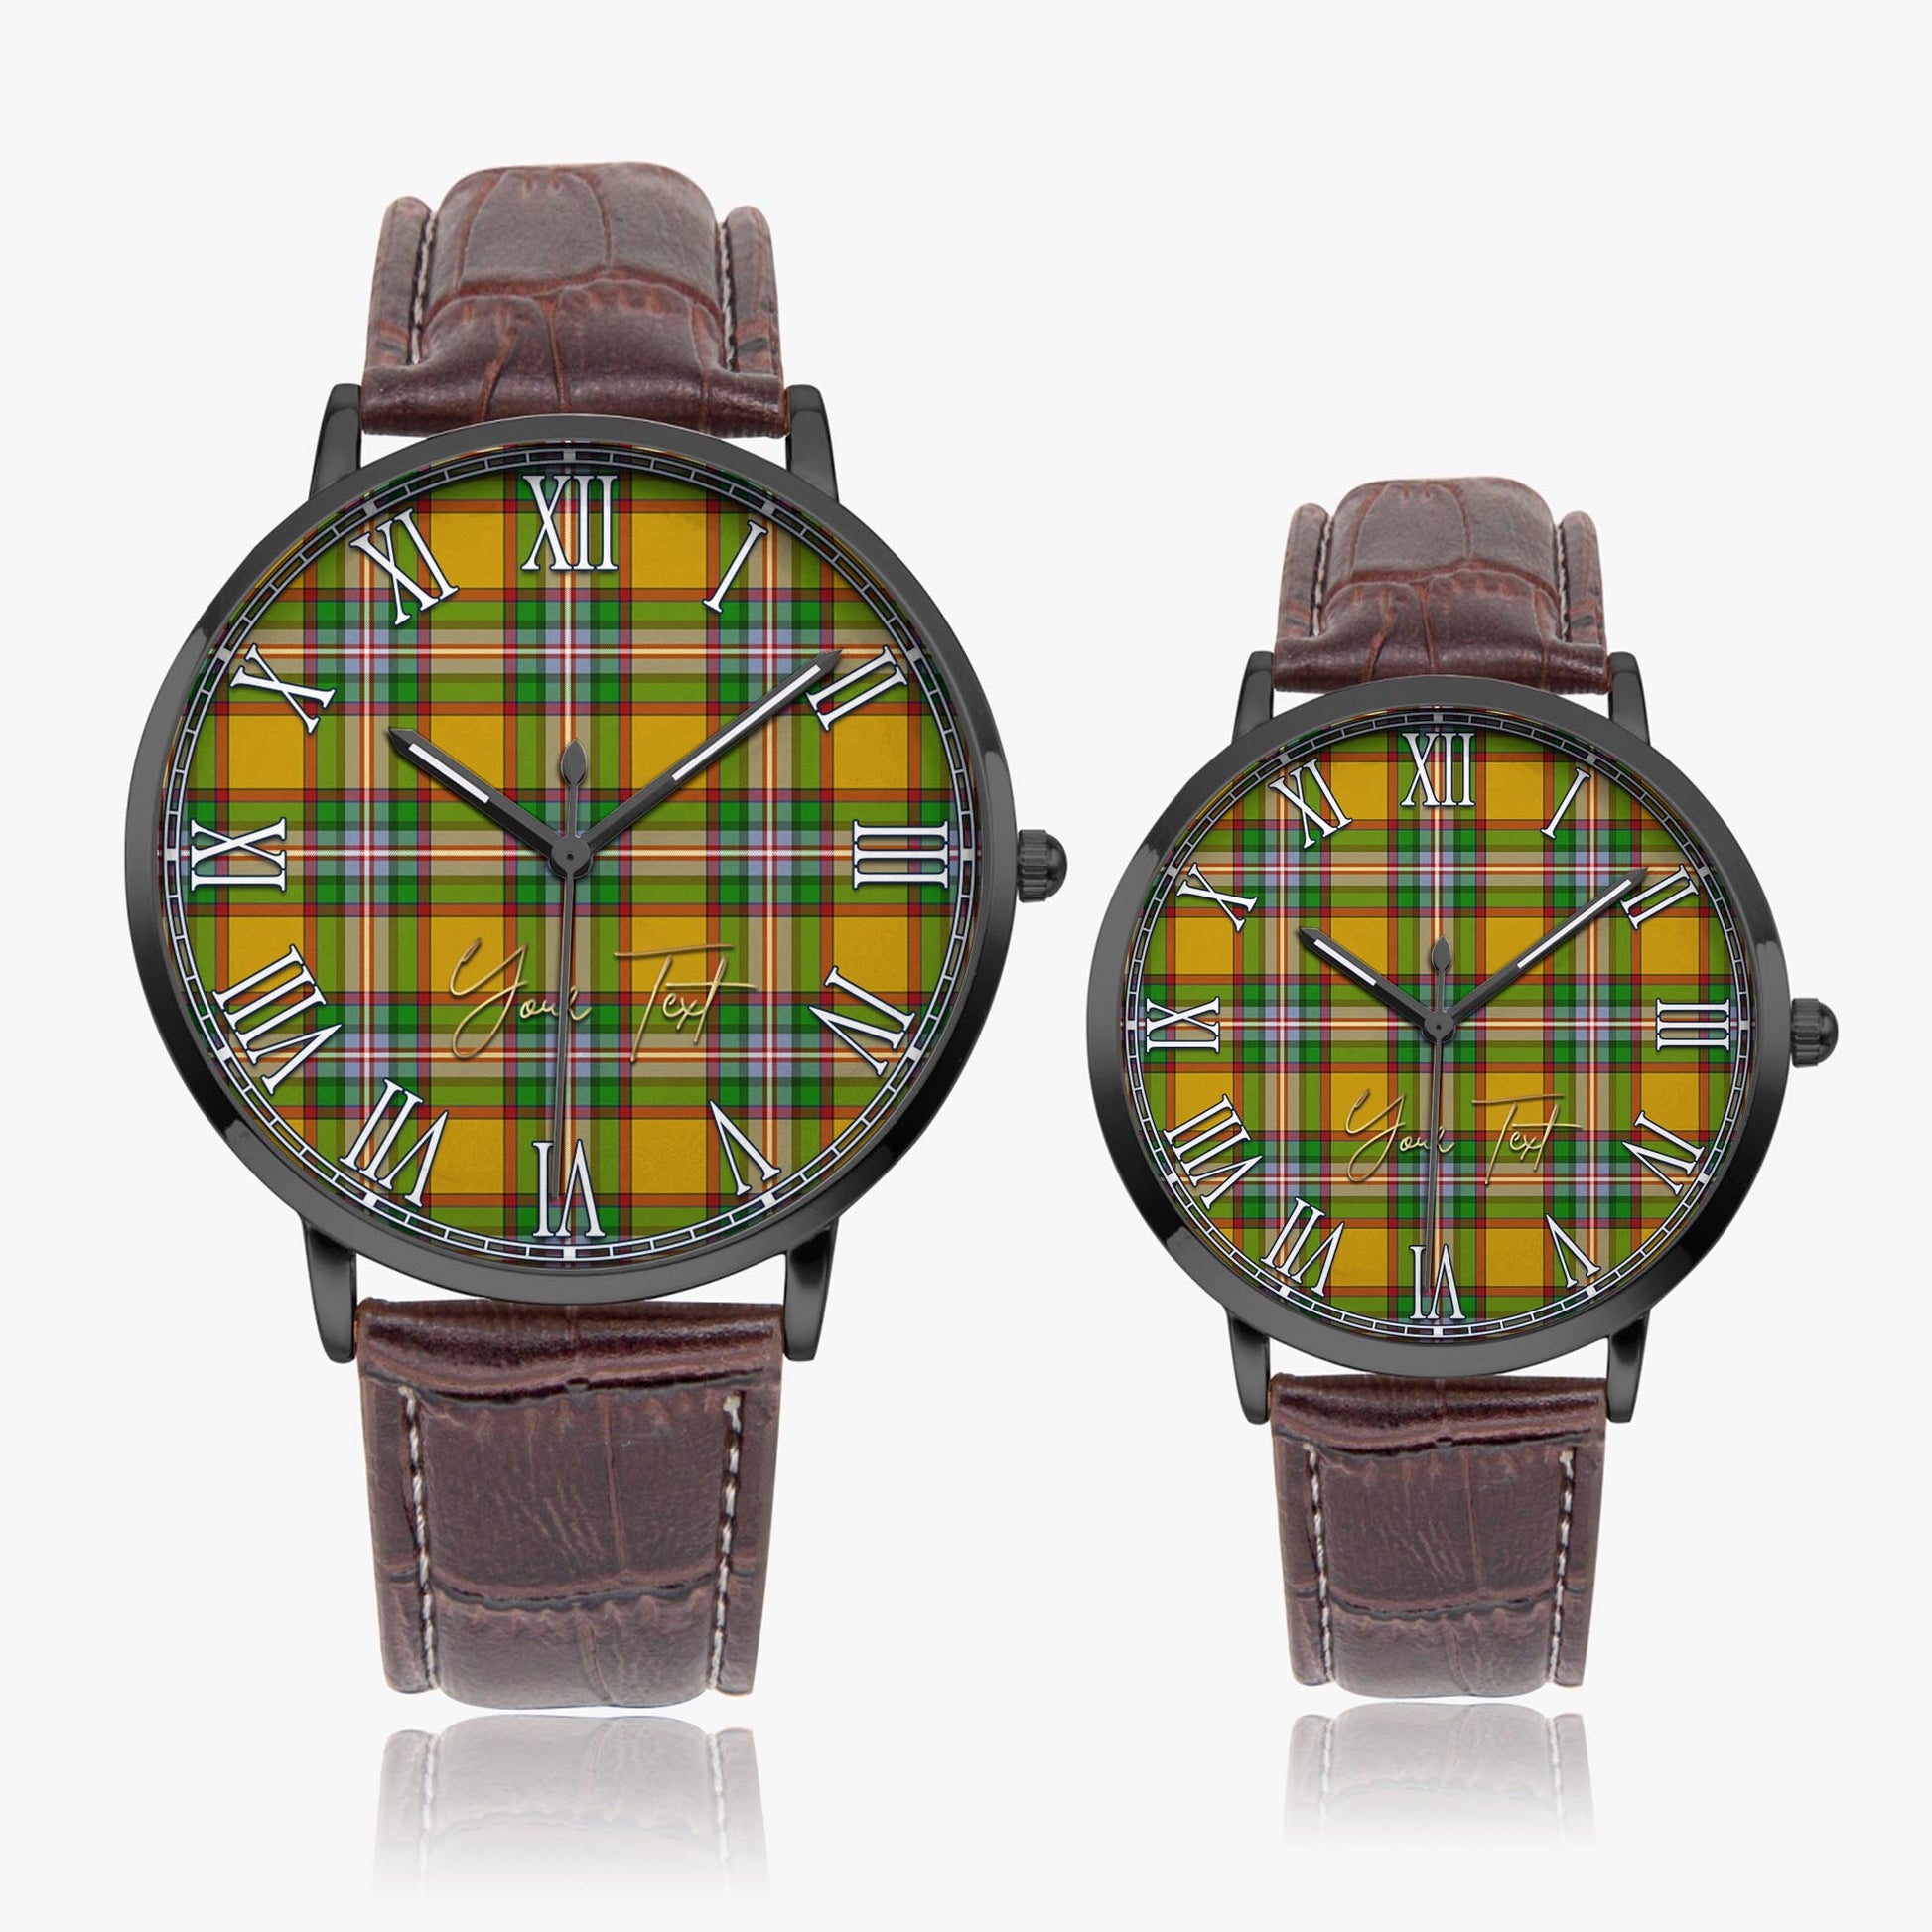 Essex County Canada Tartan Personalized Your Text Leather Trap Quartz Watch Ultra Thin Black Case With Brown Leather Strap - Tartanvibesclothing